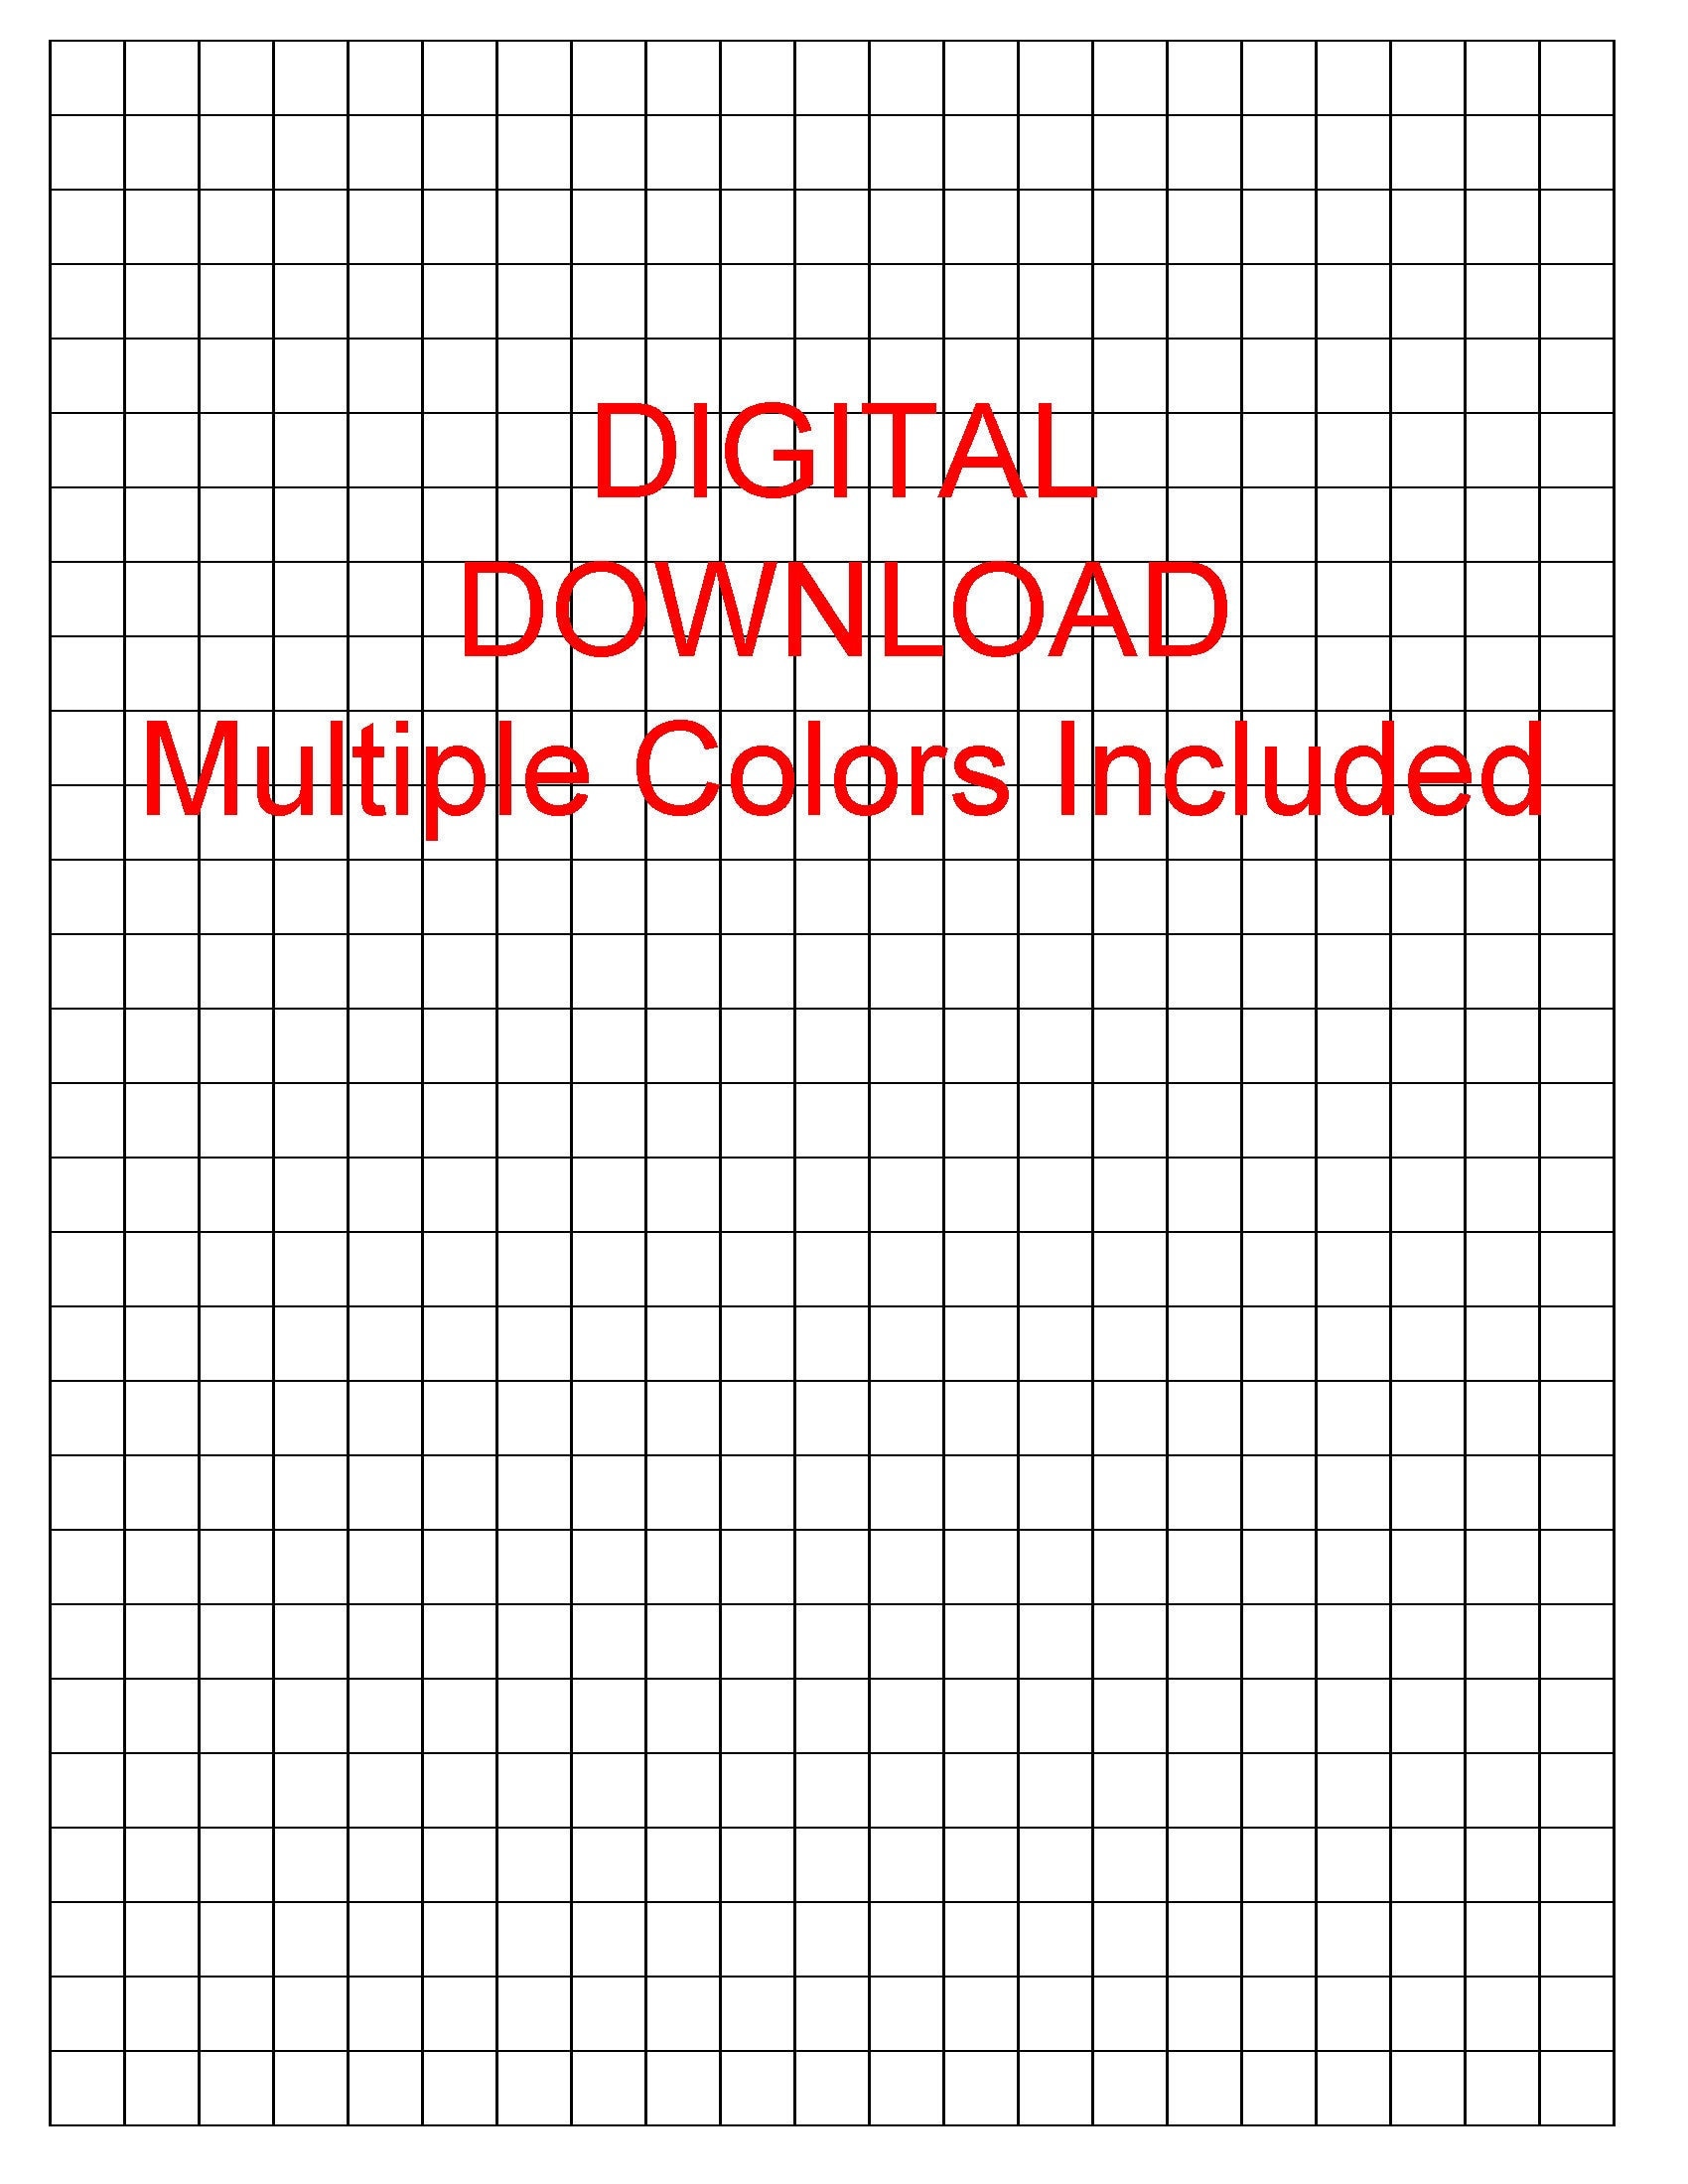 Printable Graph Paper - 1/8 inch Grid